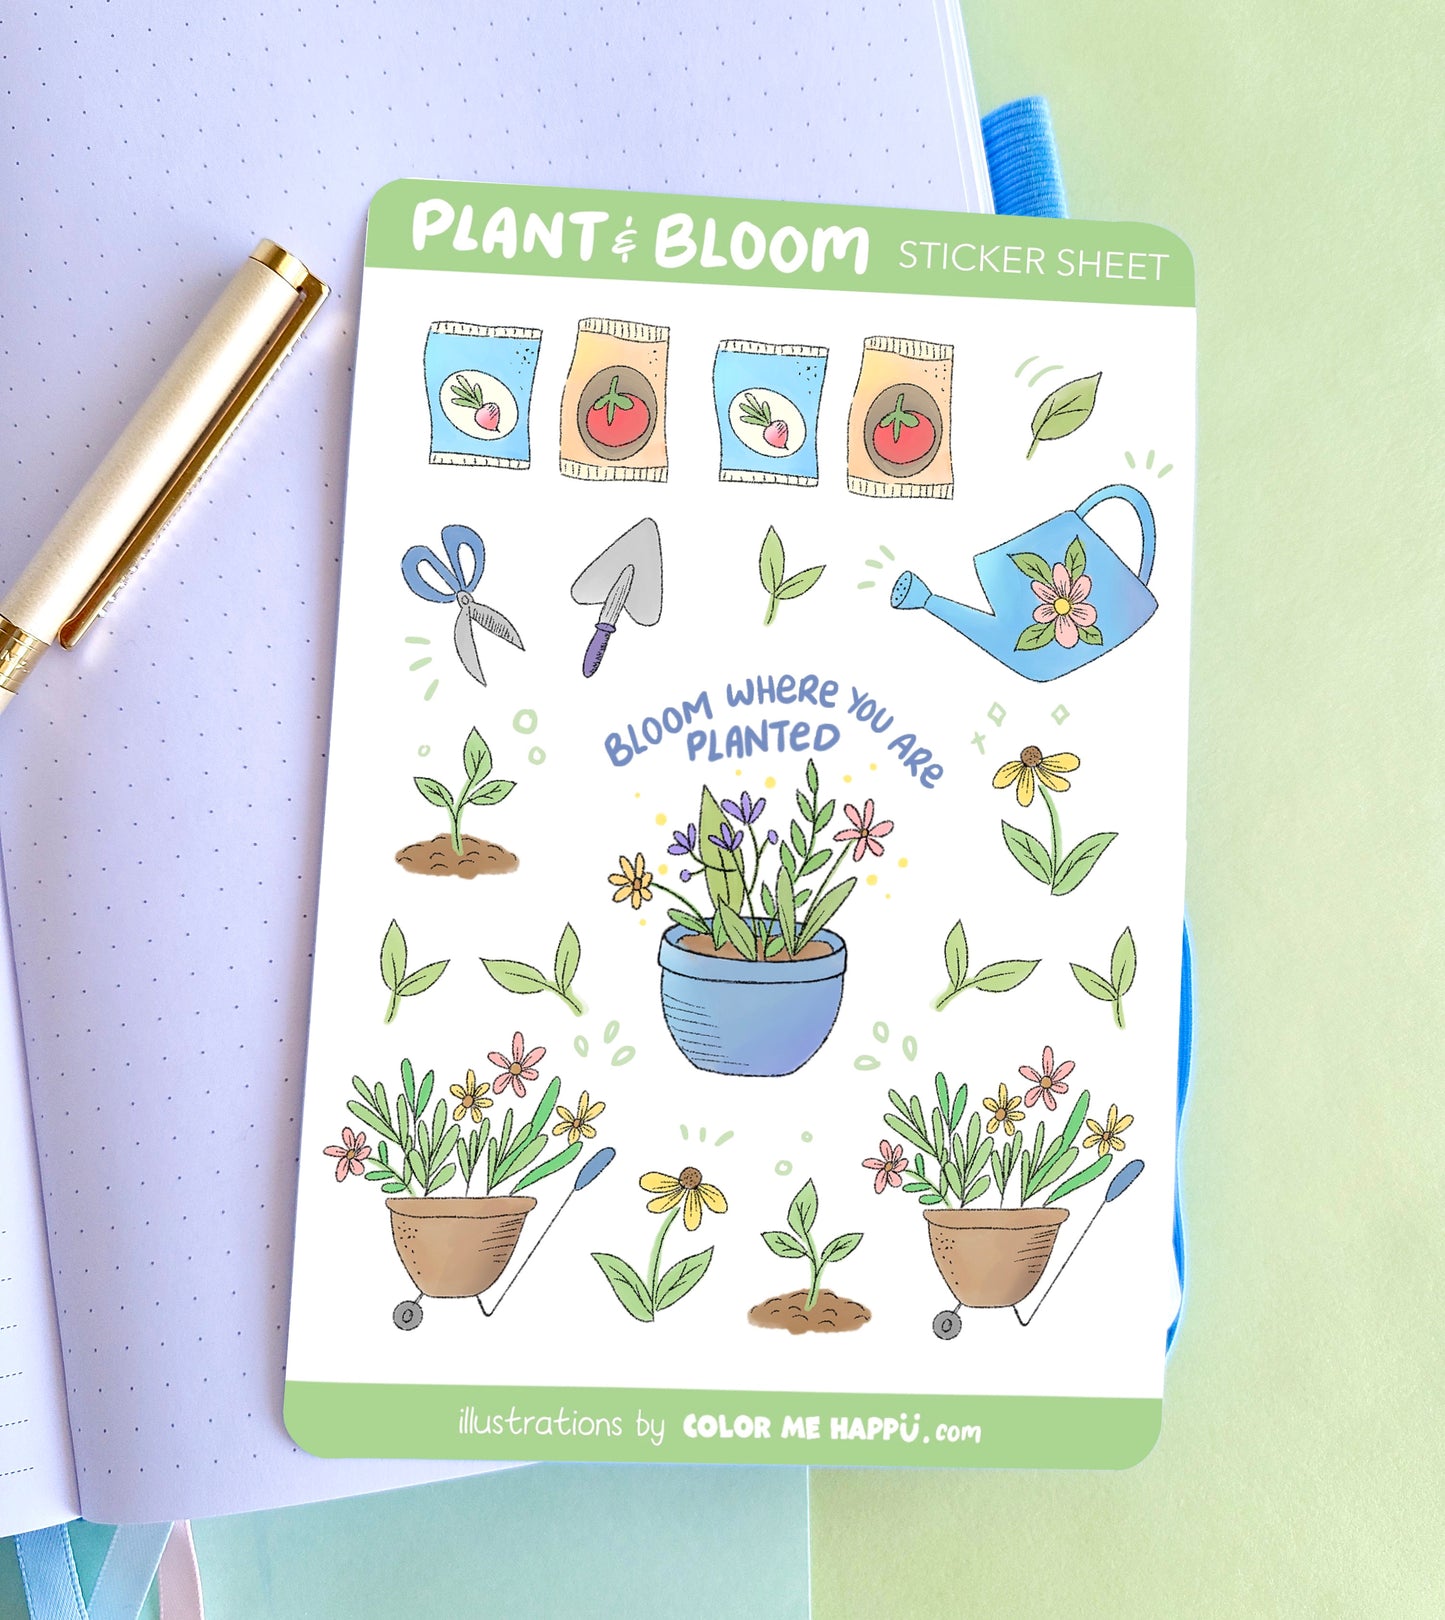 Plant and Bloom Sticker Sheet